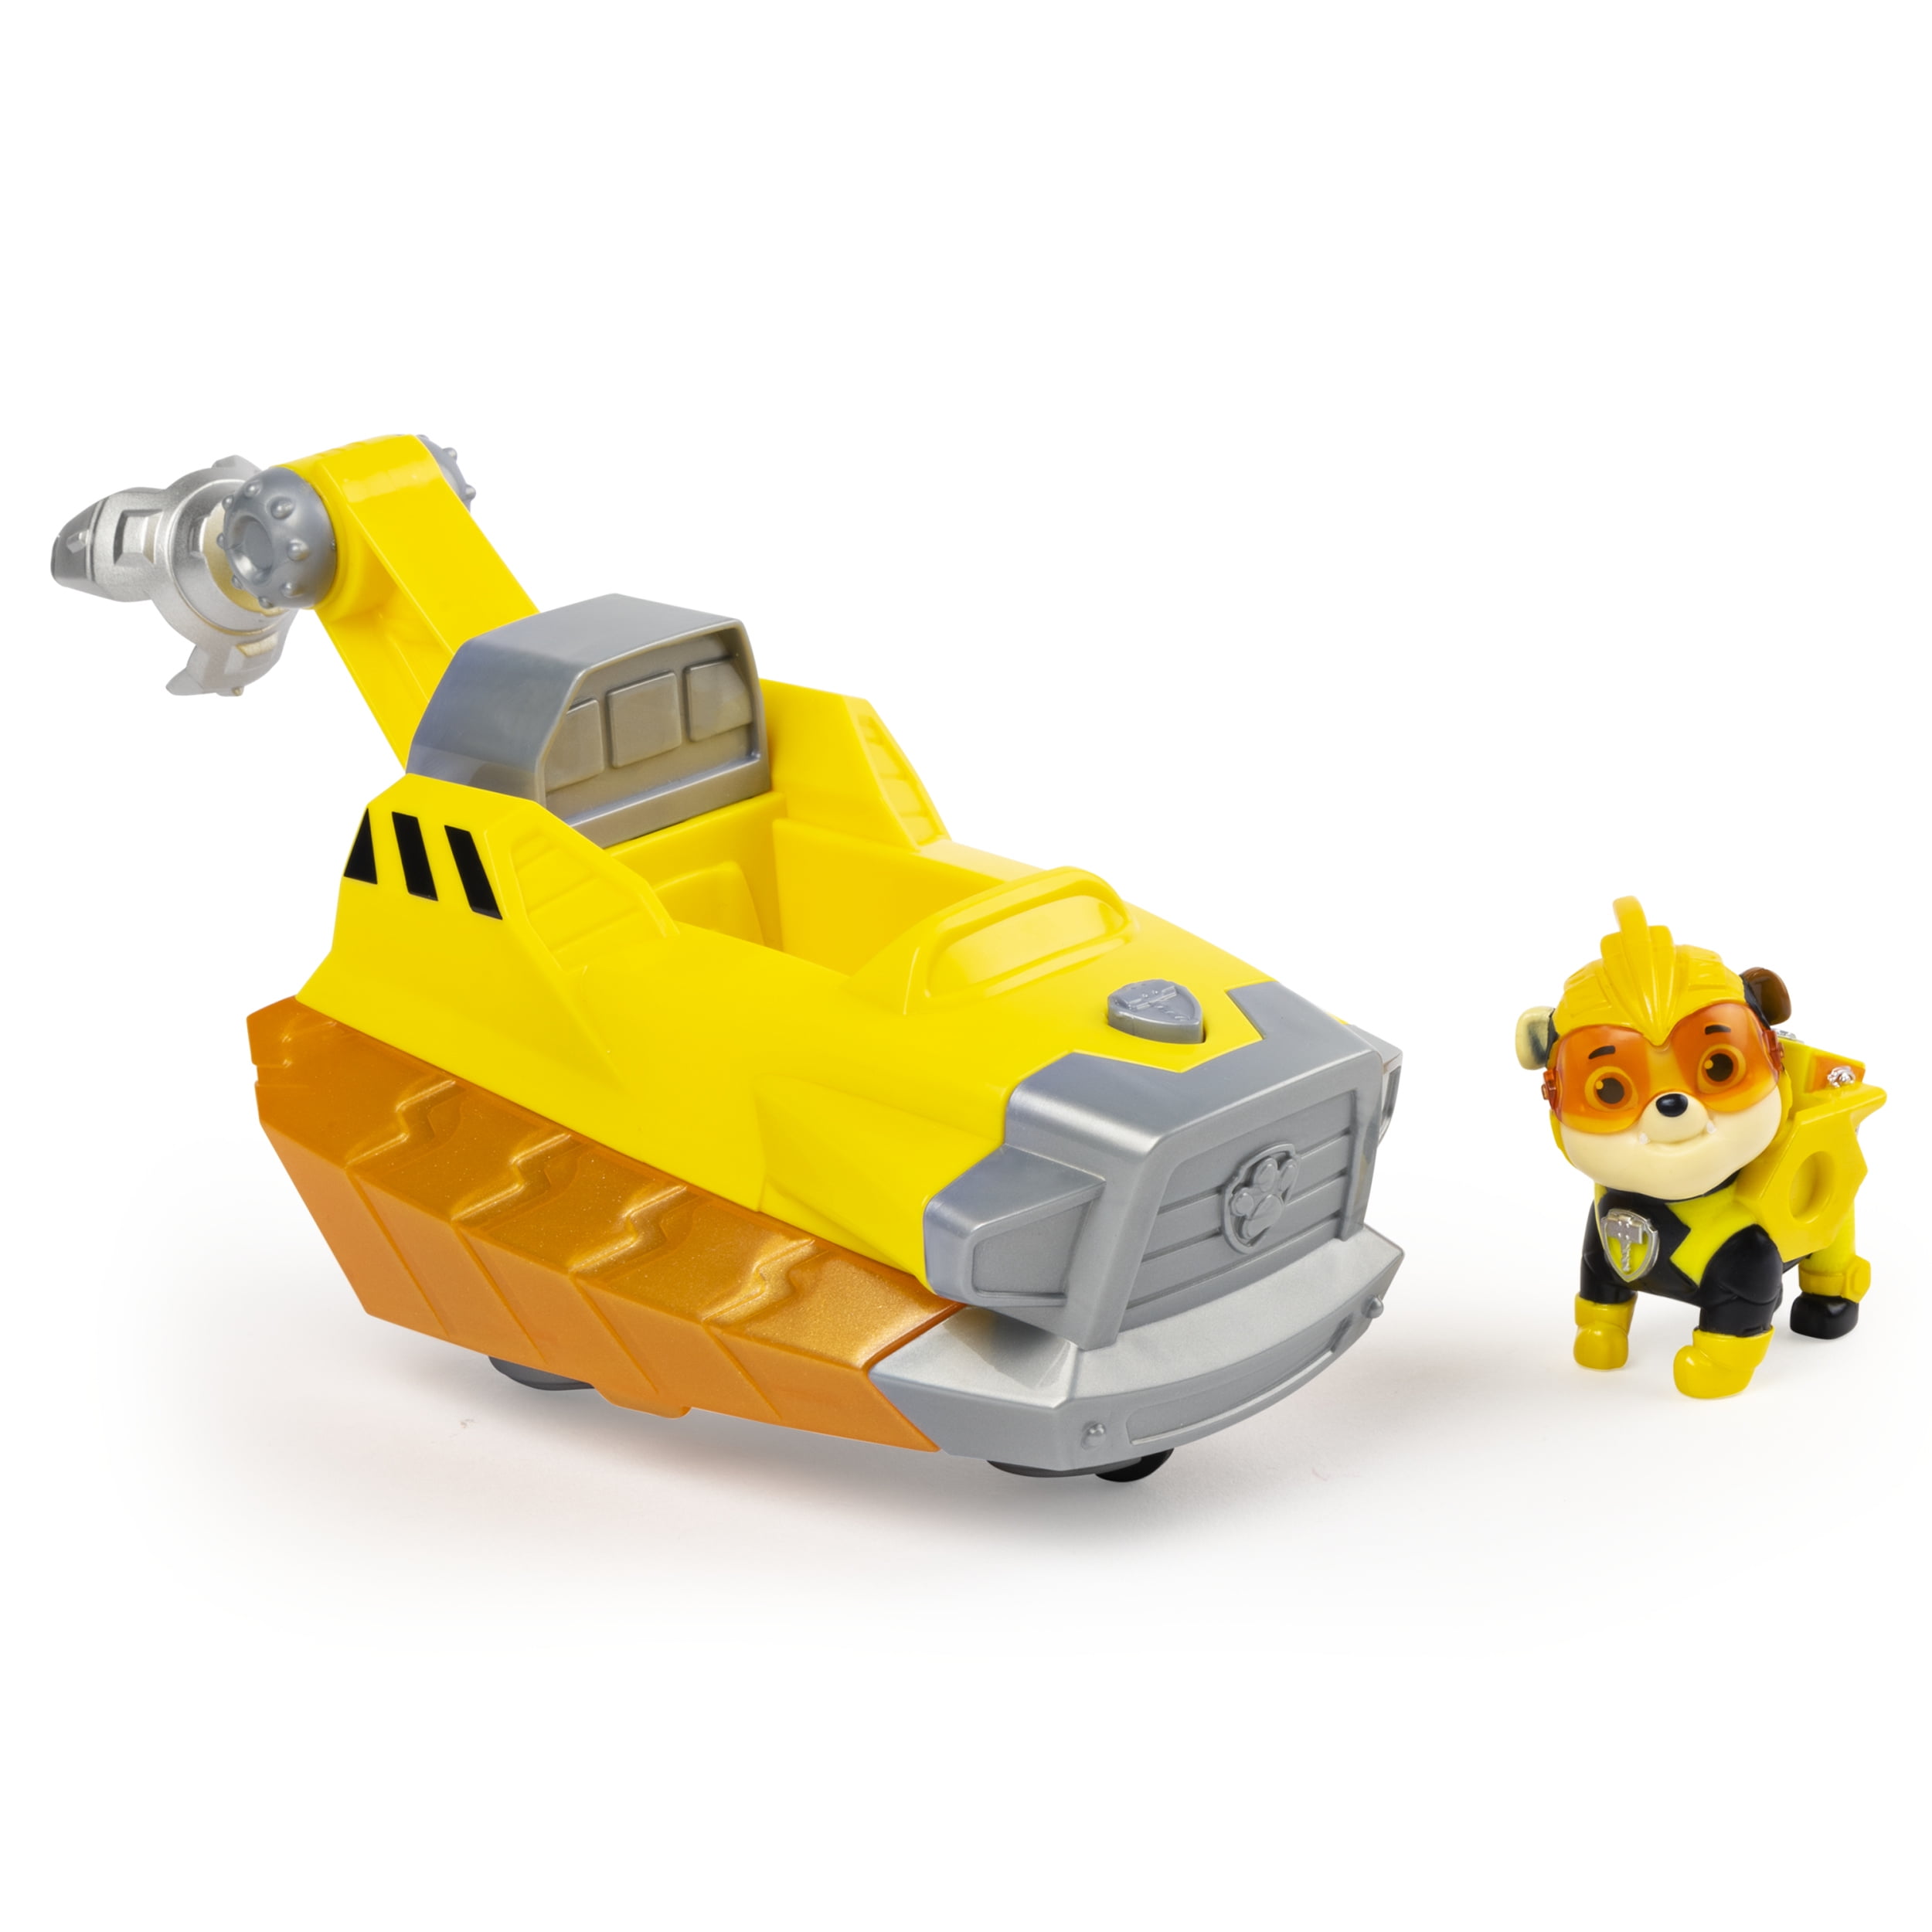 købe Spille computerspil De er PAW Patrol, Mighty Pups Charged Up Rubble's Deluxe Vehicle with Lights and  Sounds - Walmart.com